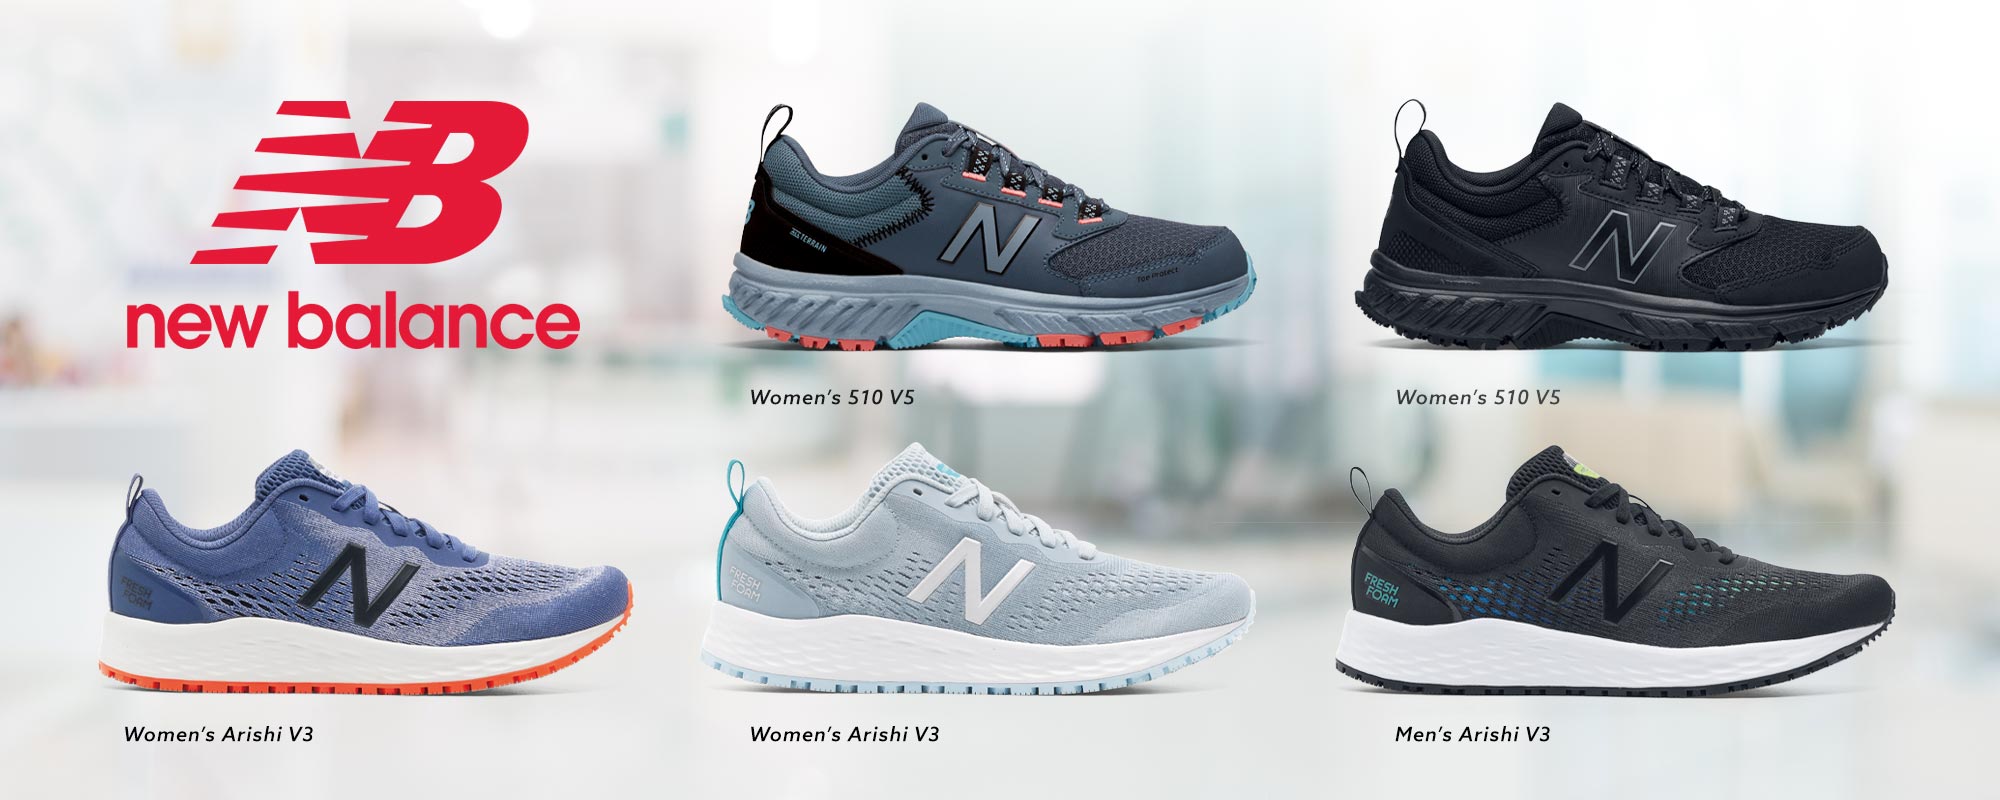 Shoes For Crews and New Balance Team to Bring Healthcare Professionals Comfortable and Safe New Balance Shoes with Shoes For Crews slip-resistant outsole – Shop Women’s and Men’s New Balance and Shoes For Crews collaboration now. 